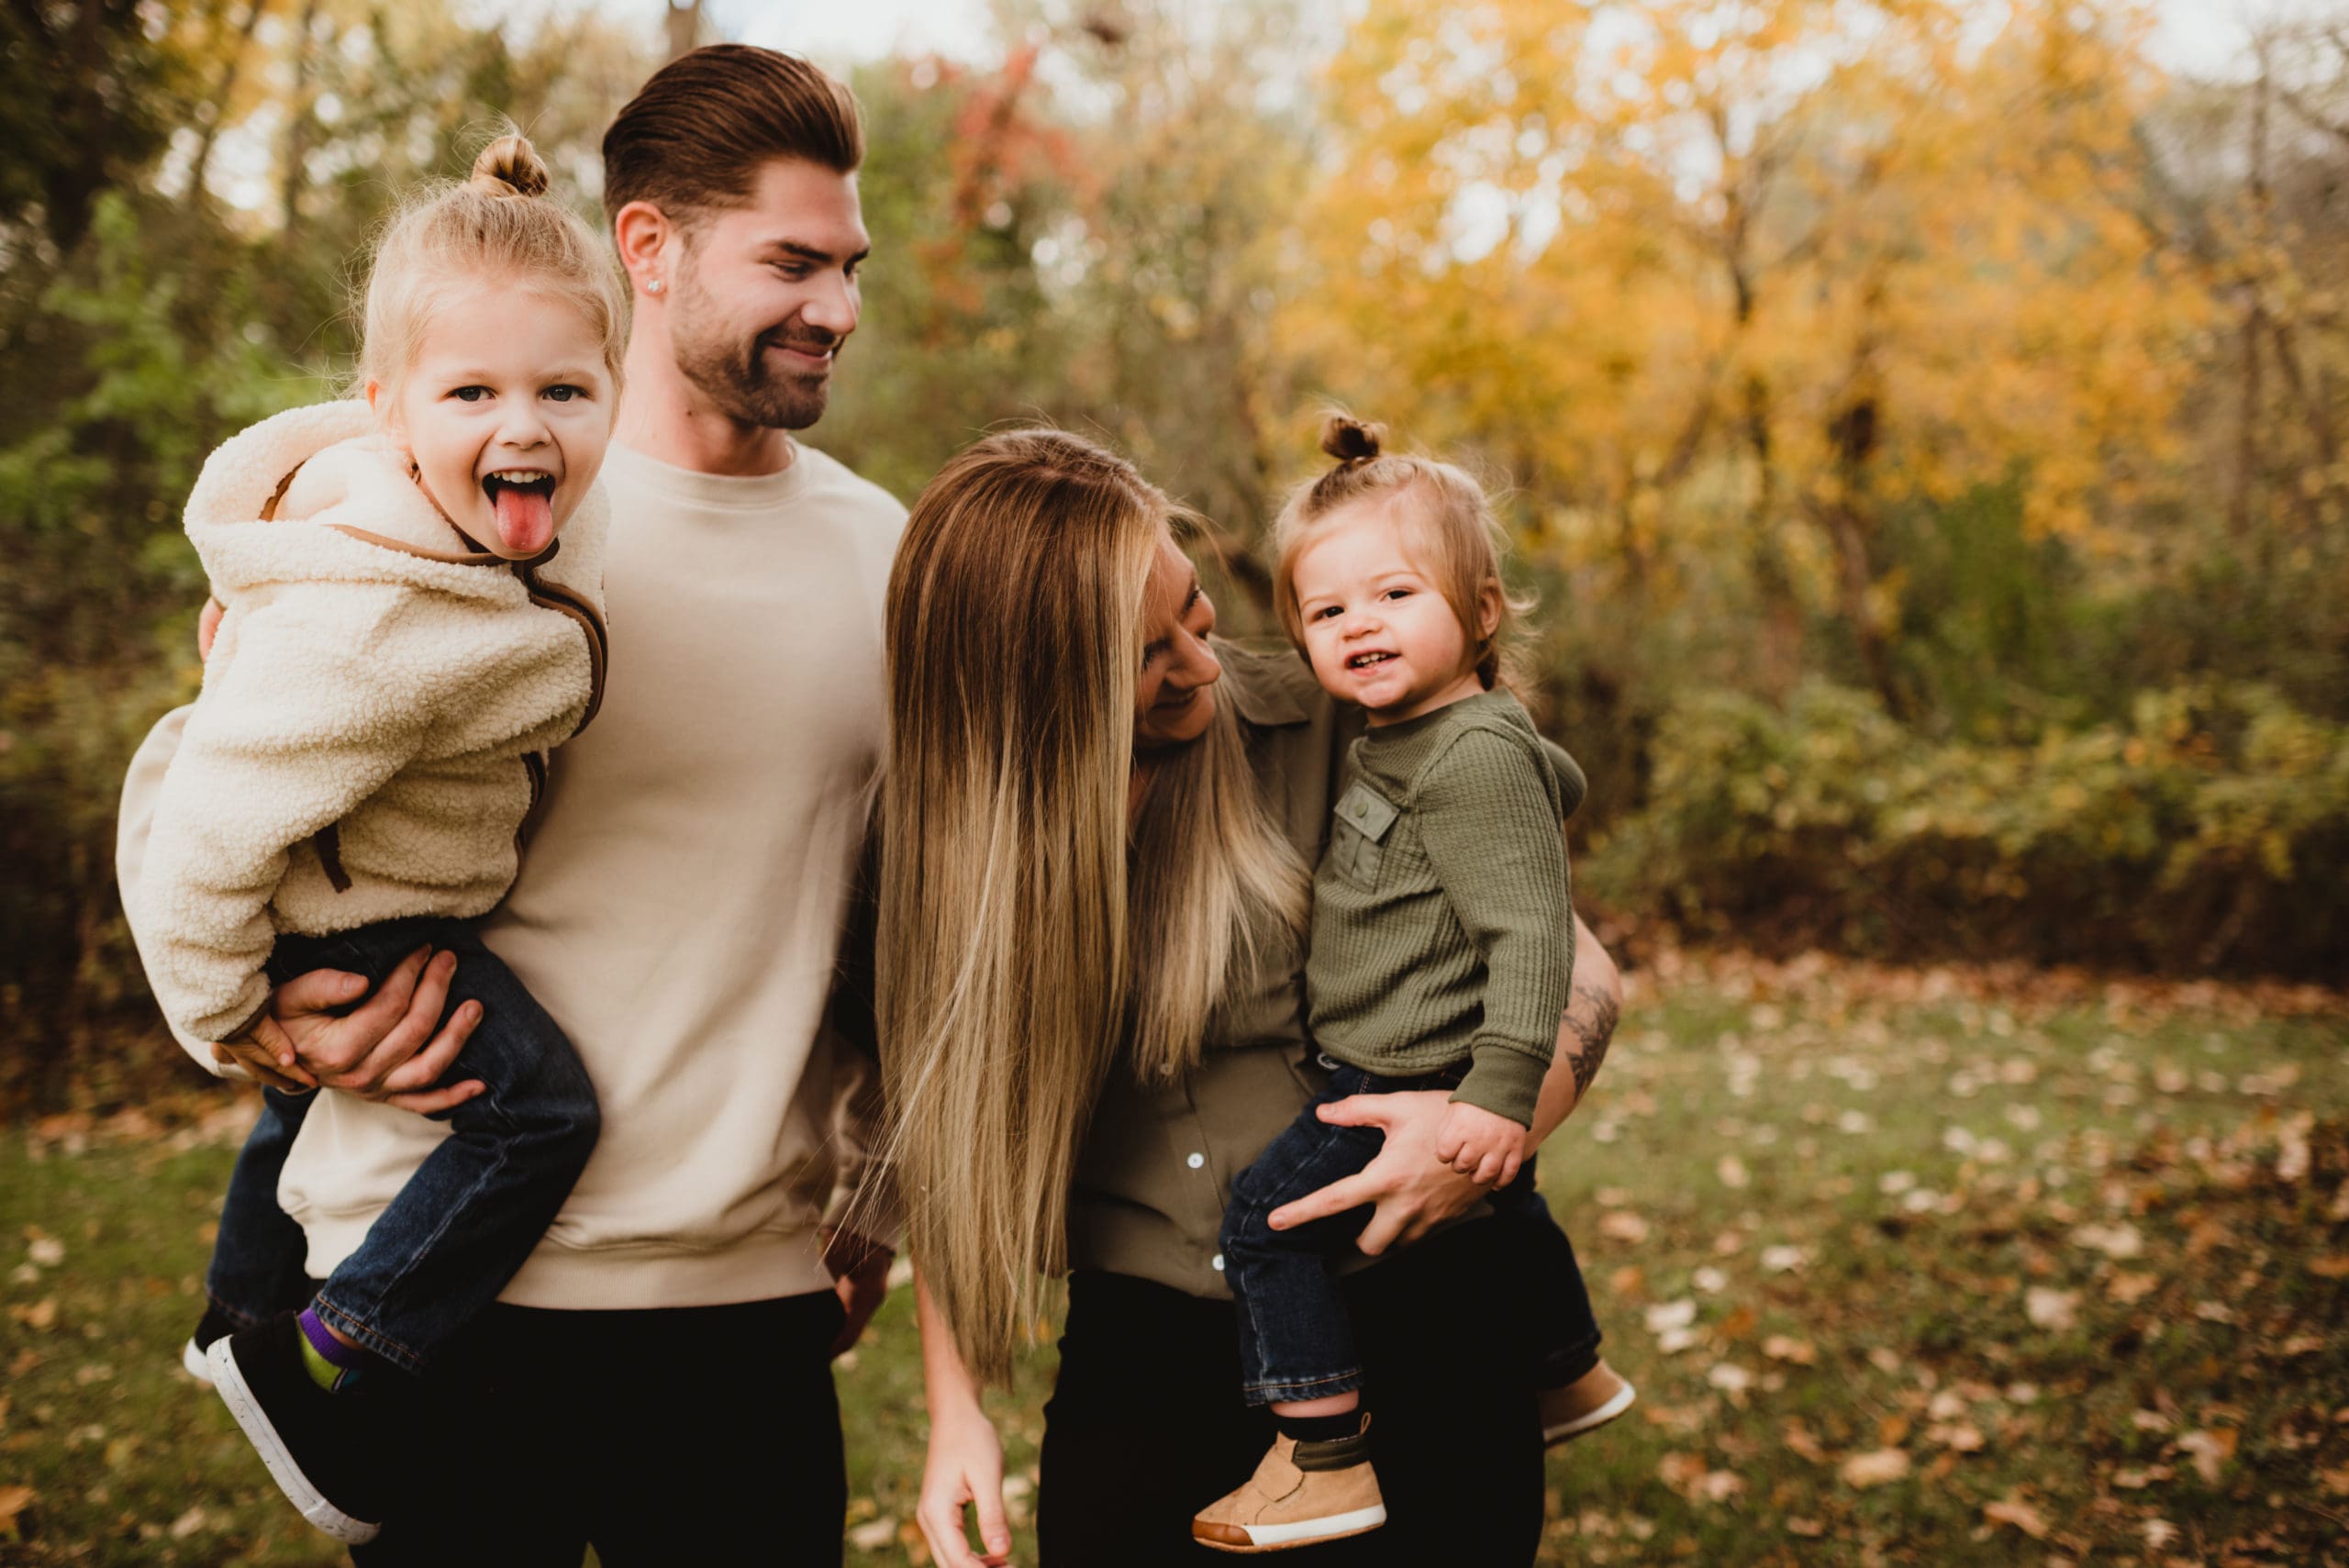 outfit ideas for family photo shoot